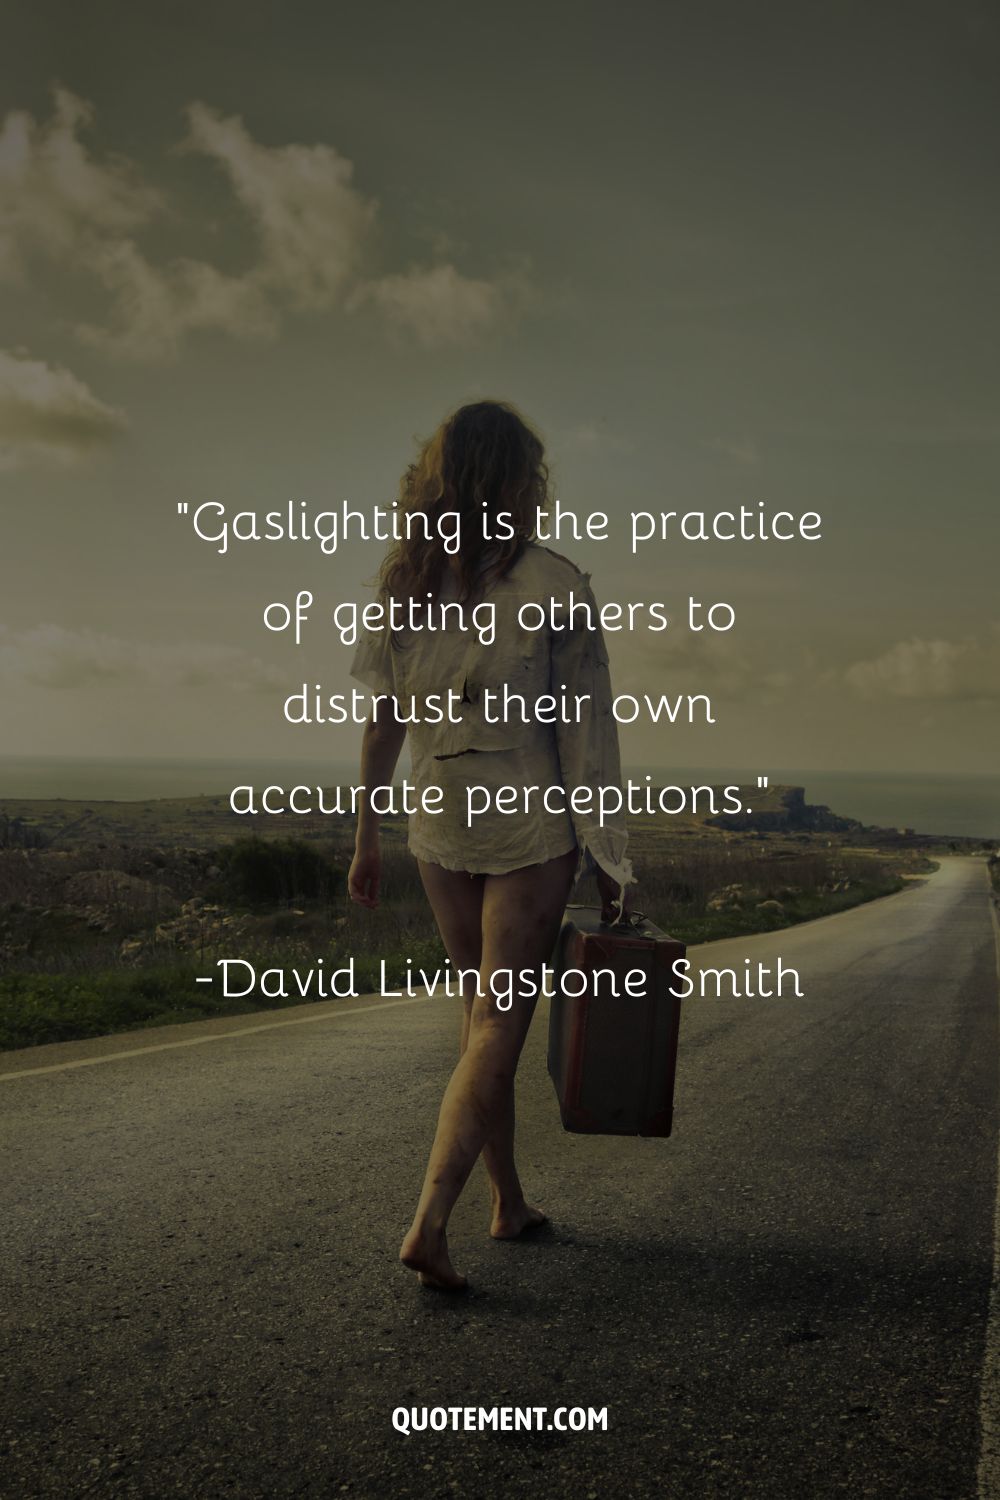 Gaslighting is the practice of getting others to distrust their own accurate perceptions.